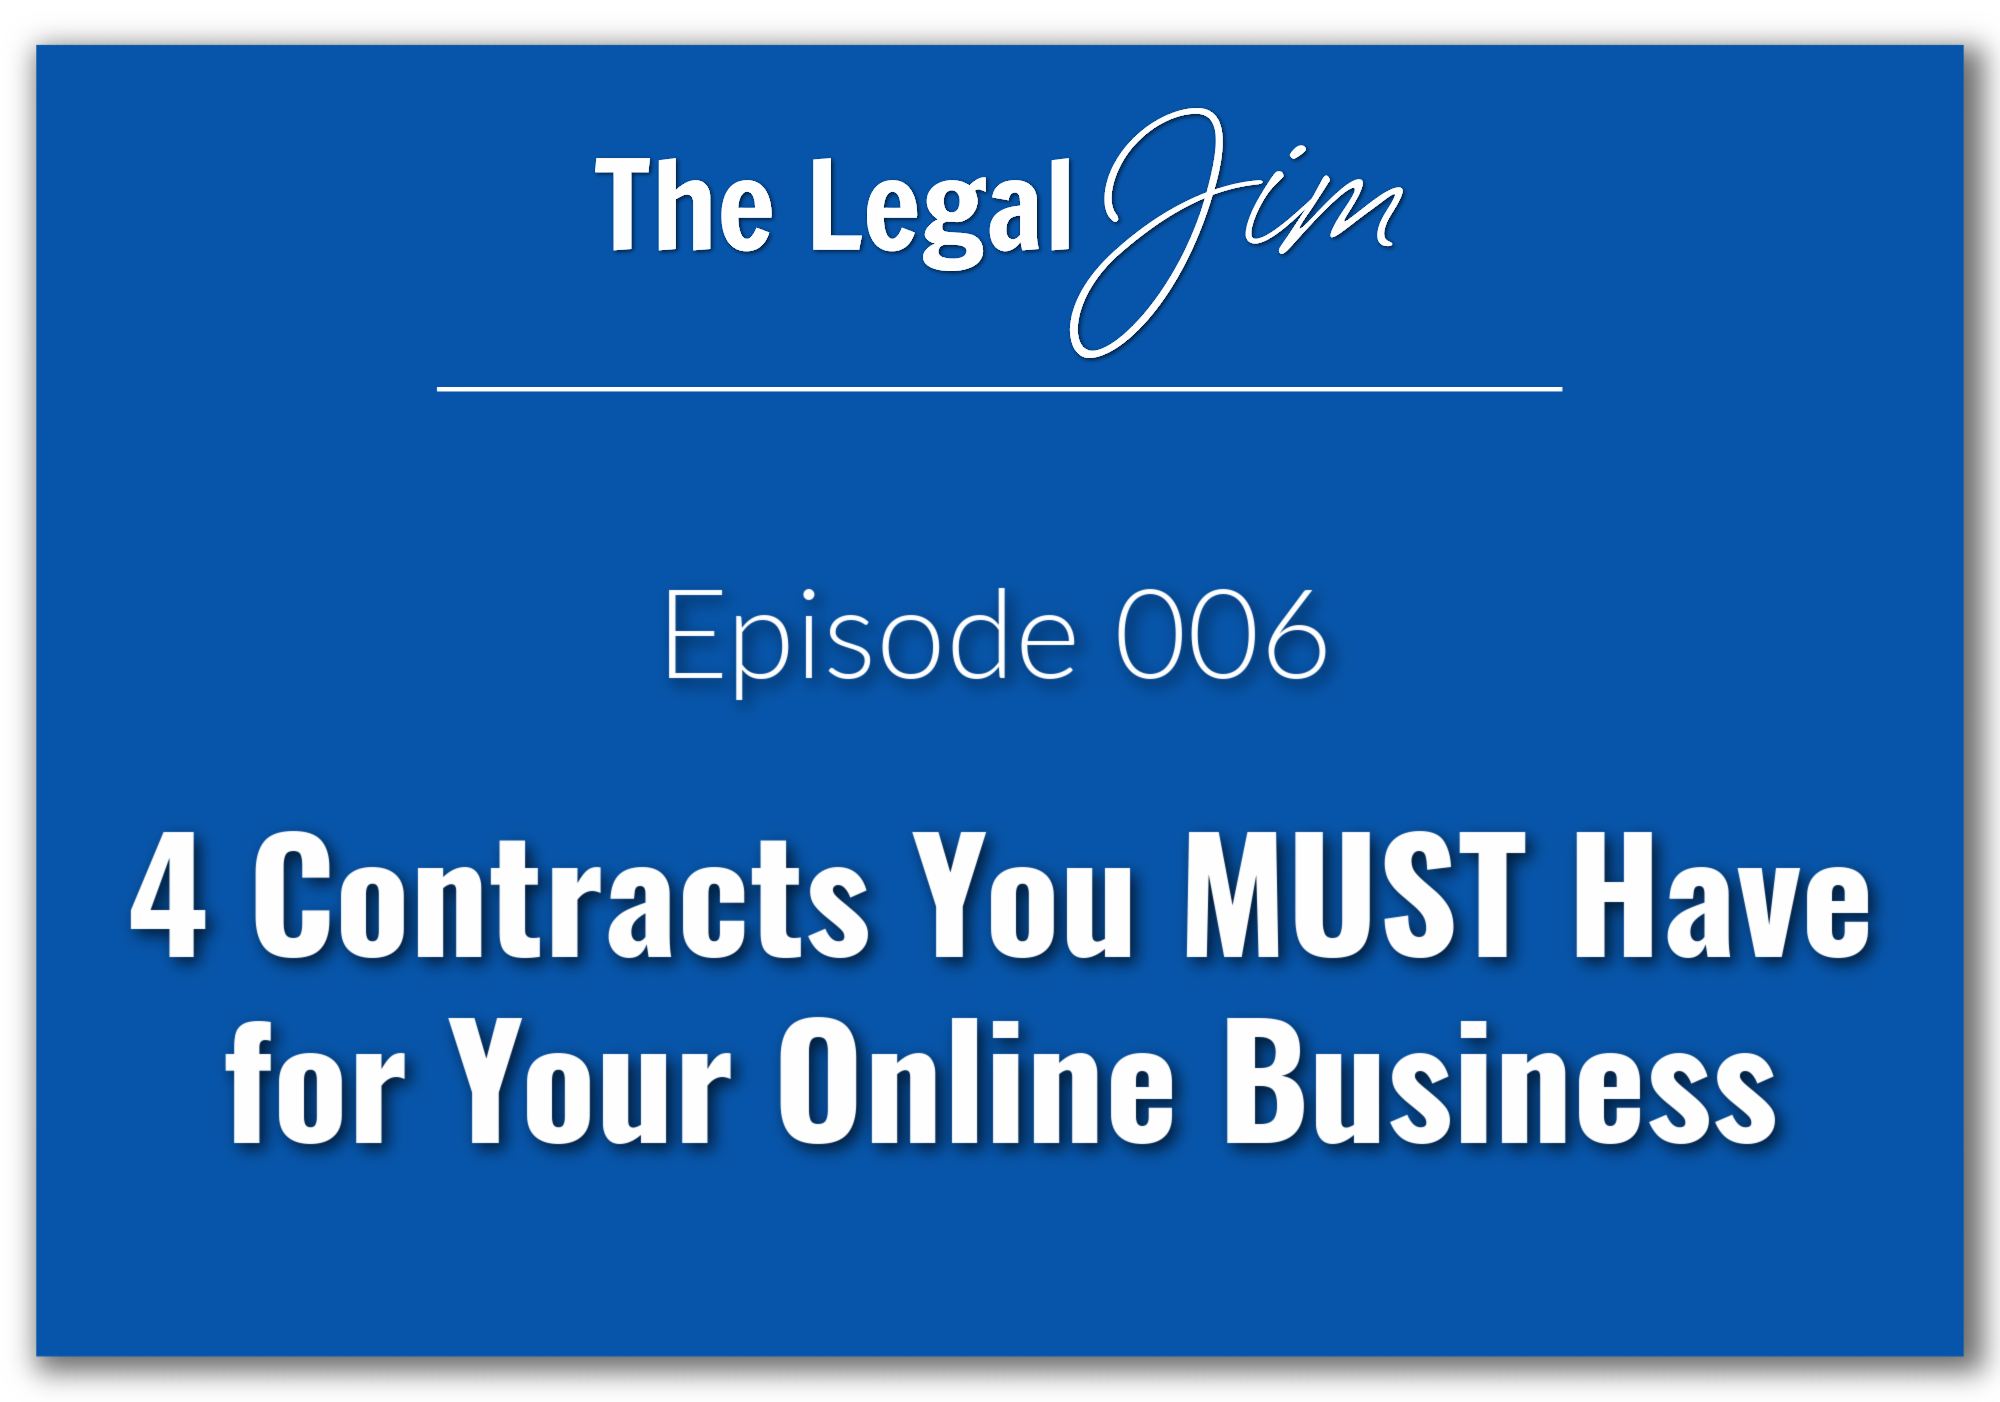 4 Contracts You MUST Have for Your Online Business